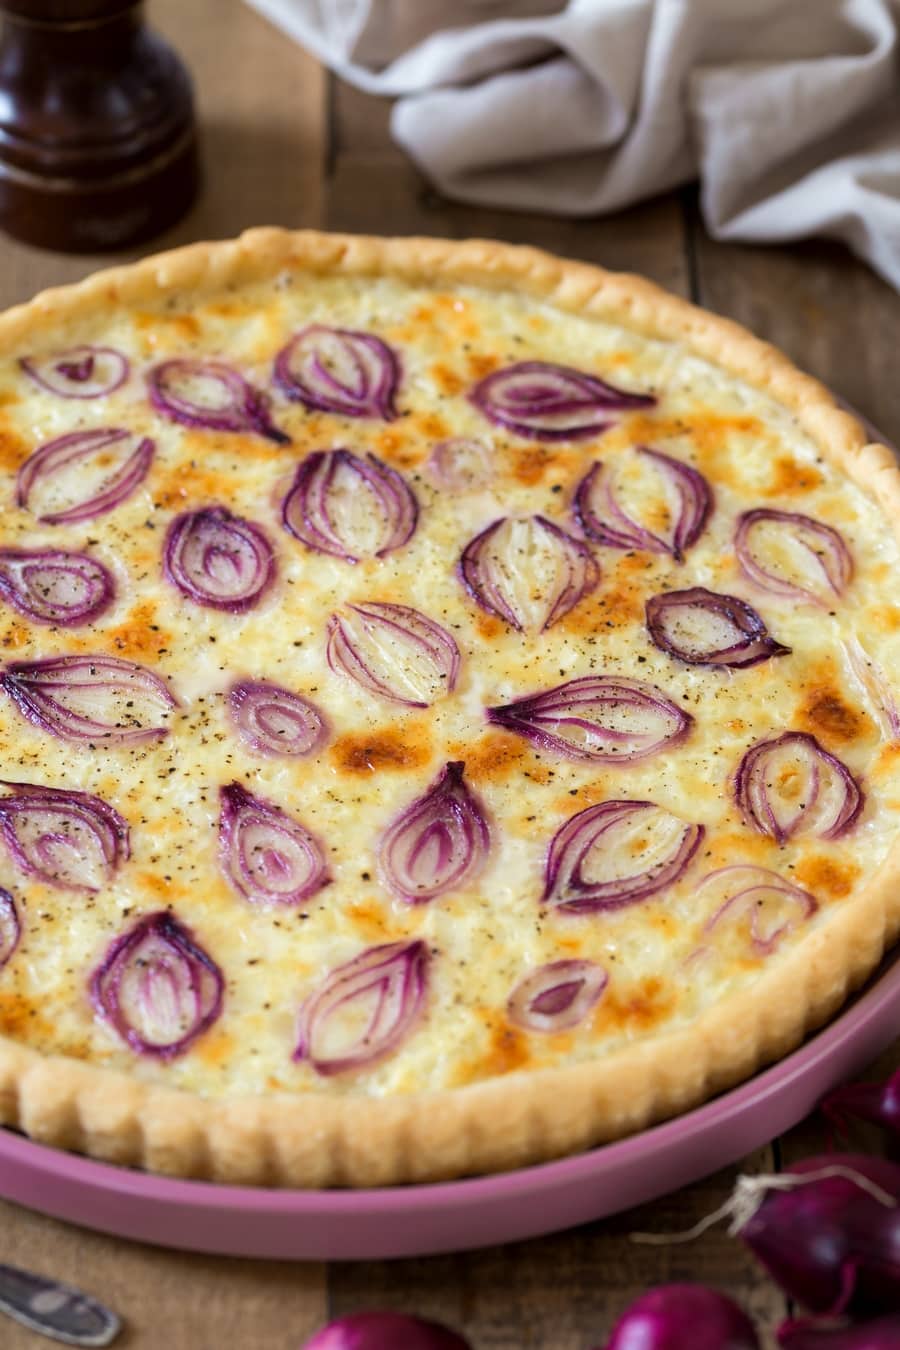 Pearl onion cottage cheese pie.